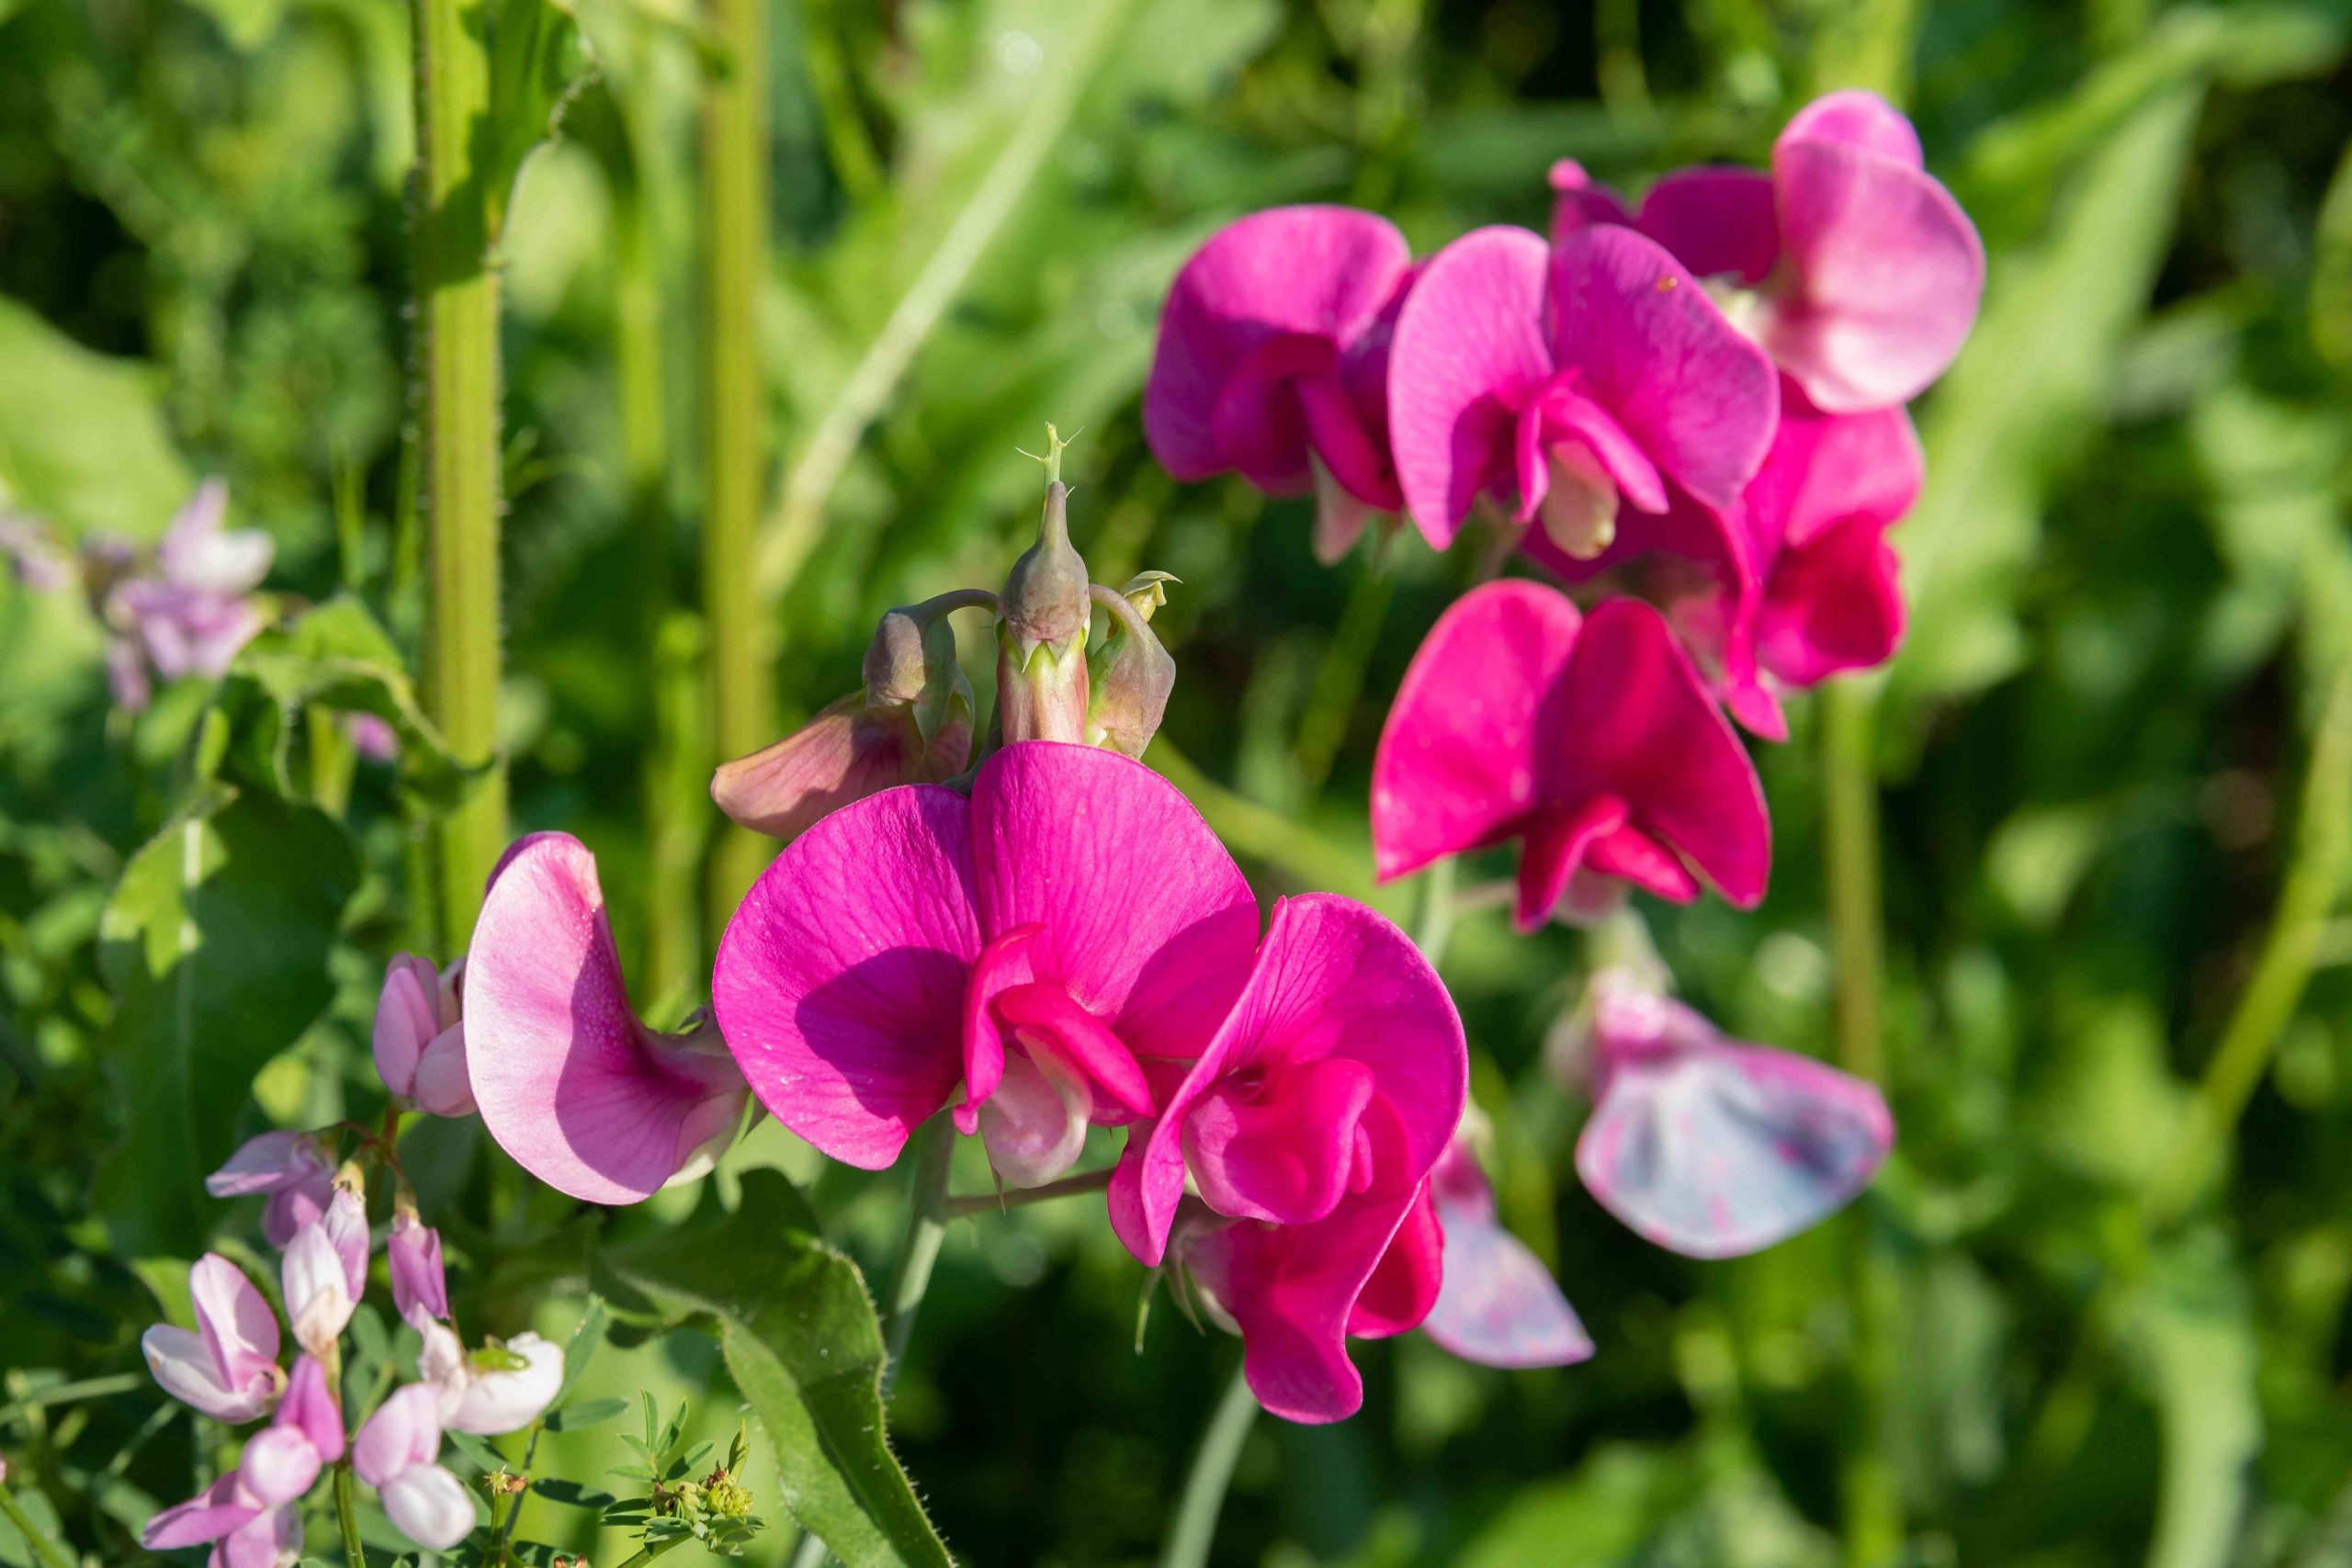 How to Care for Sweet Pea Seedlings: 5 Simple Tips